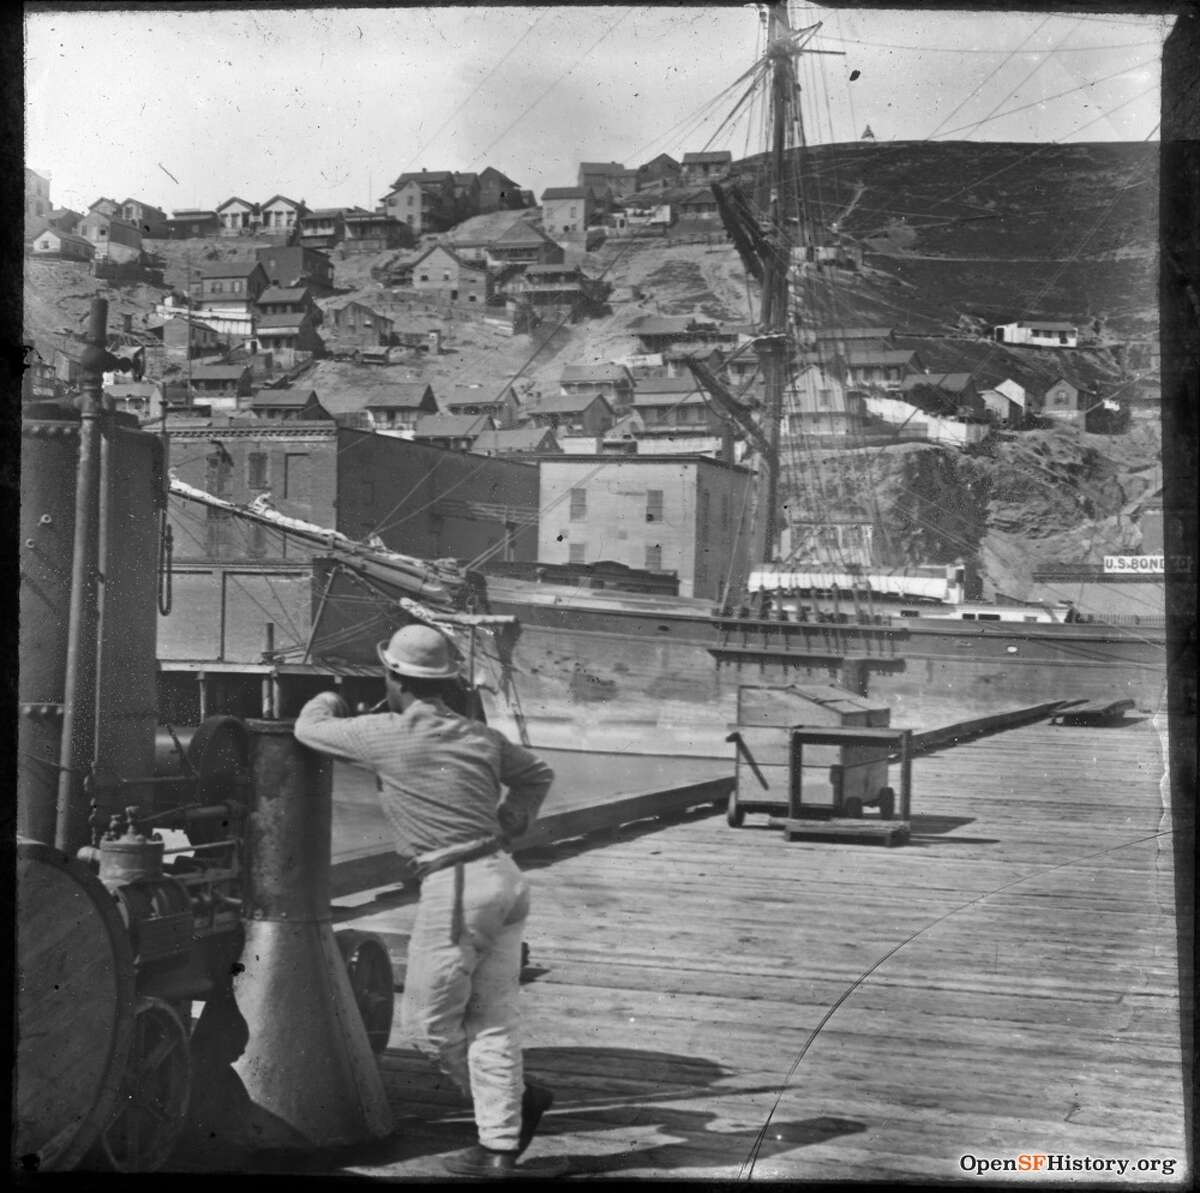 Early, undated photo of Telegraph Hill, from waterfront pier near present Embarcadero. Courtesy of OpenSFHistory.org.